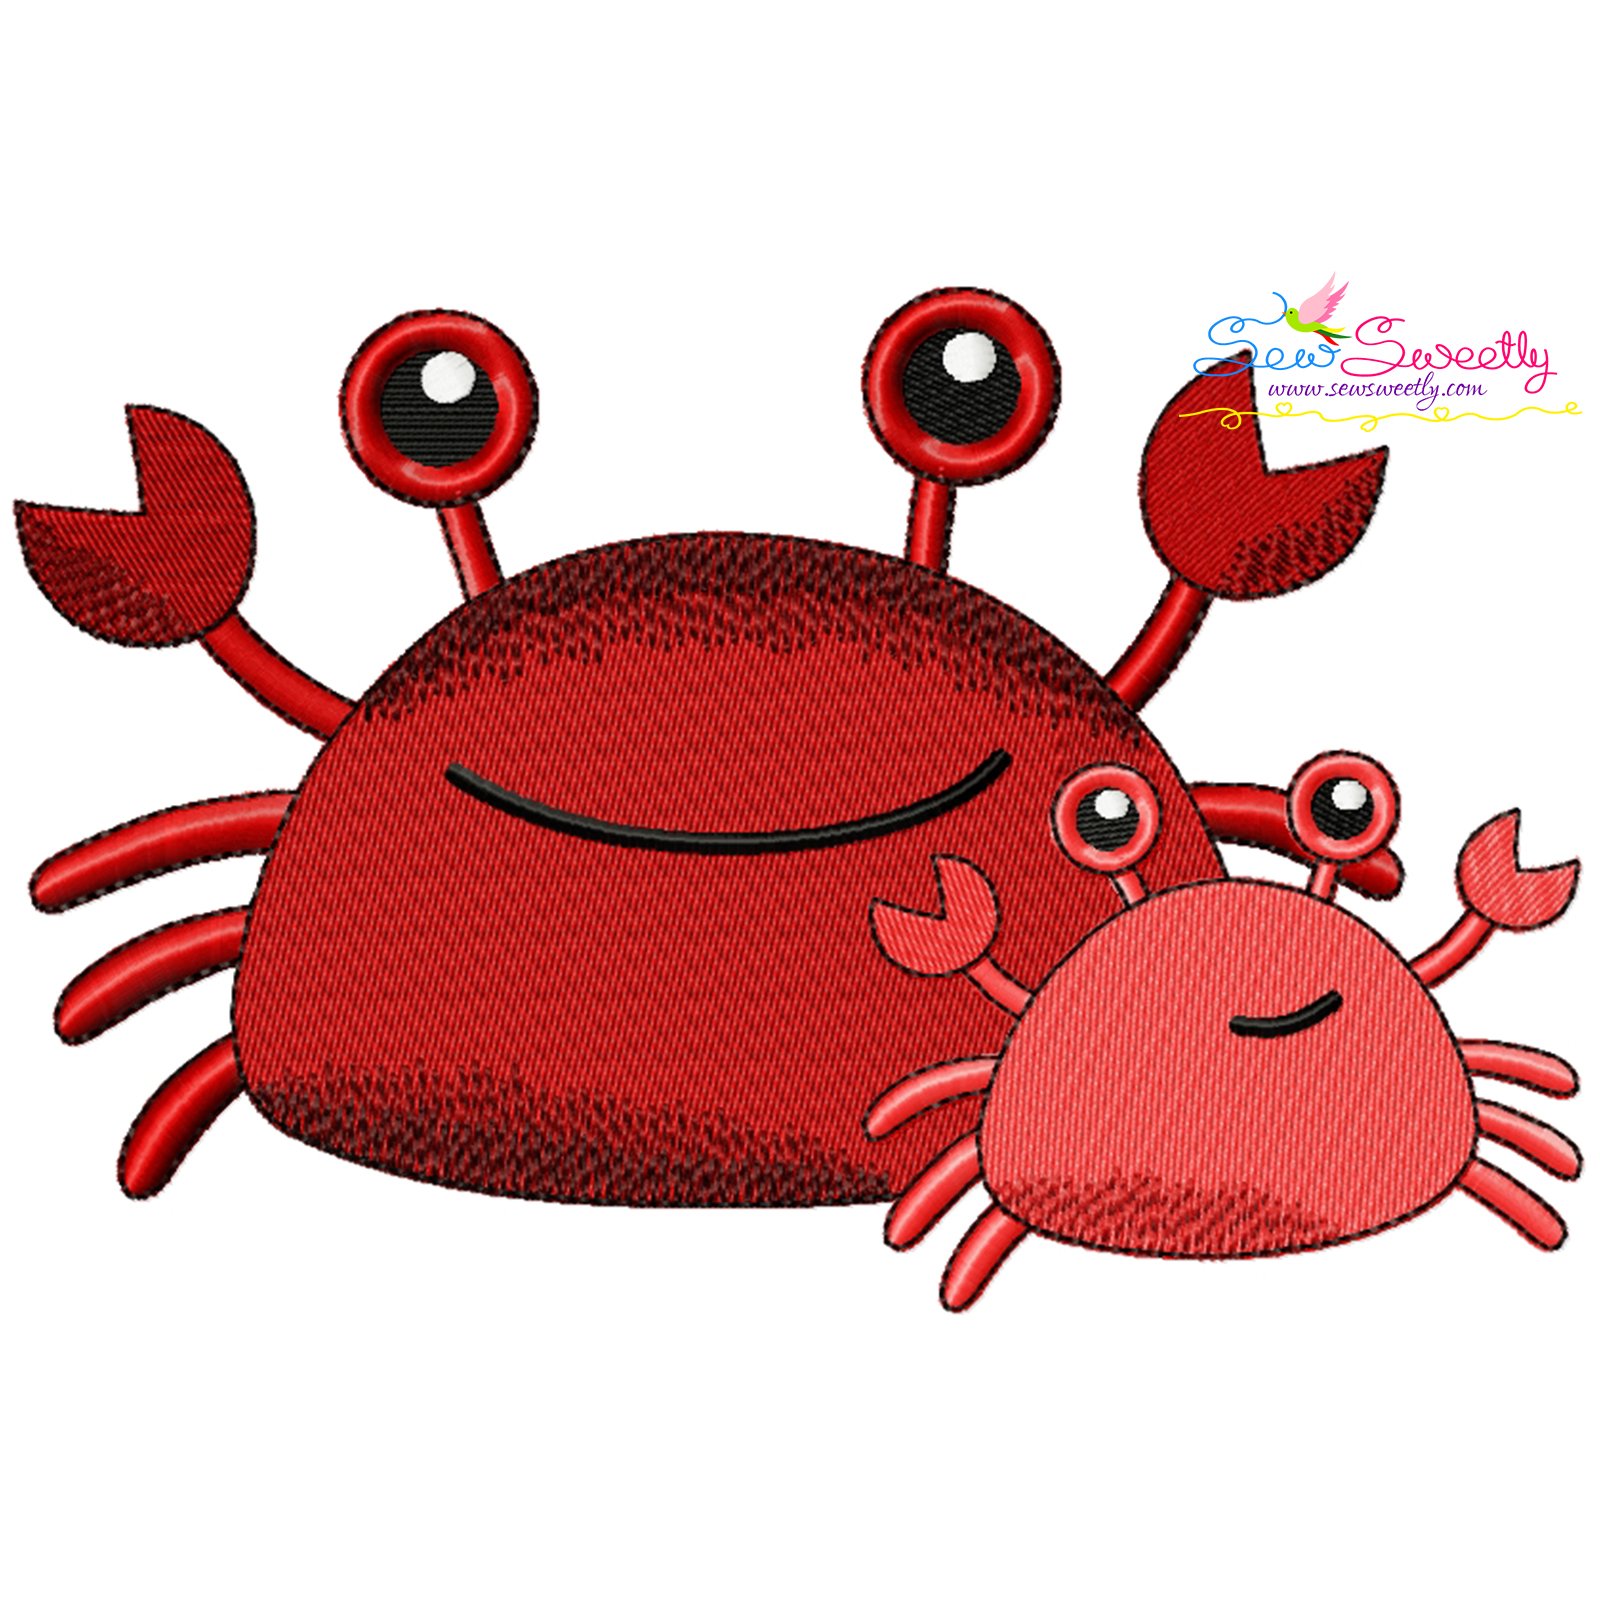 baby crab clipart